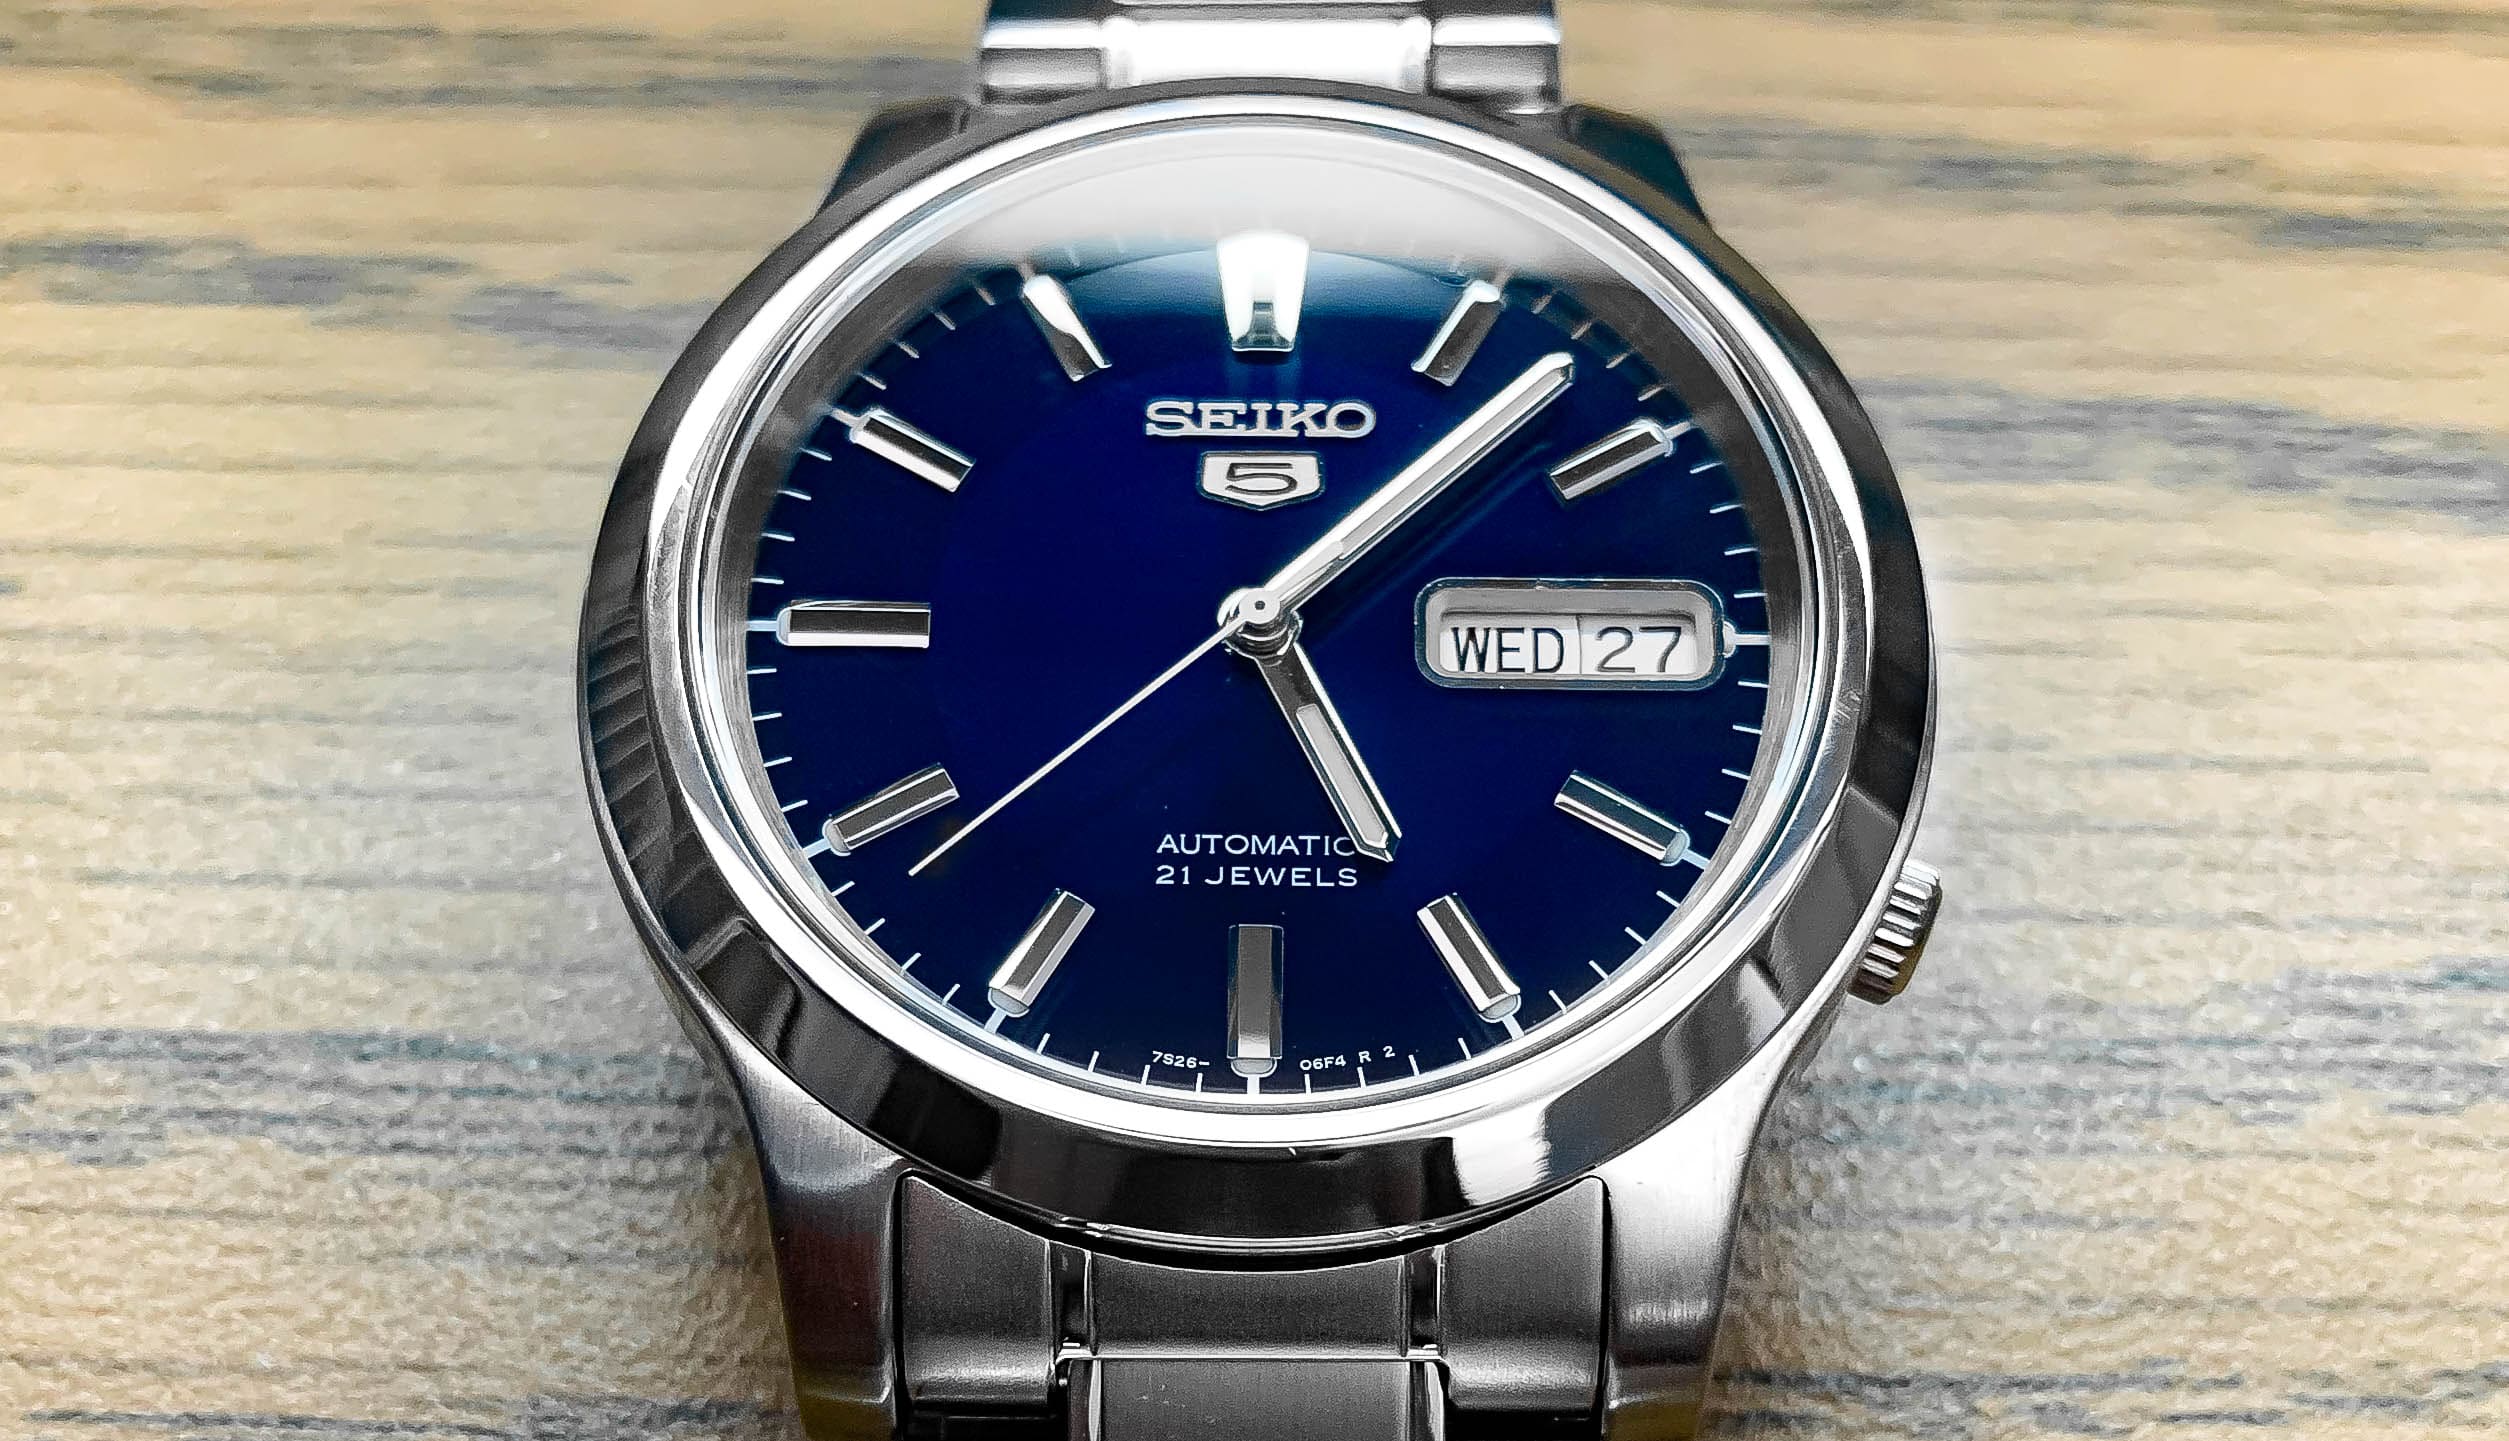 Seiko 5 SNK793 Review: Keeping It 